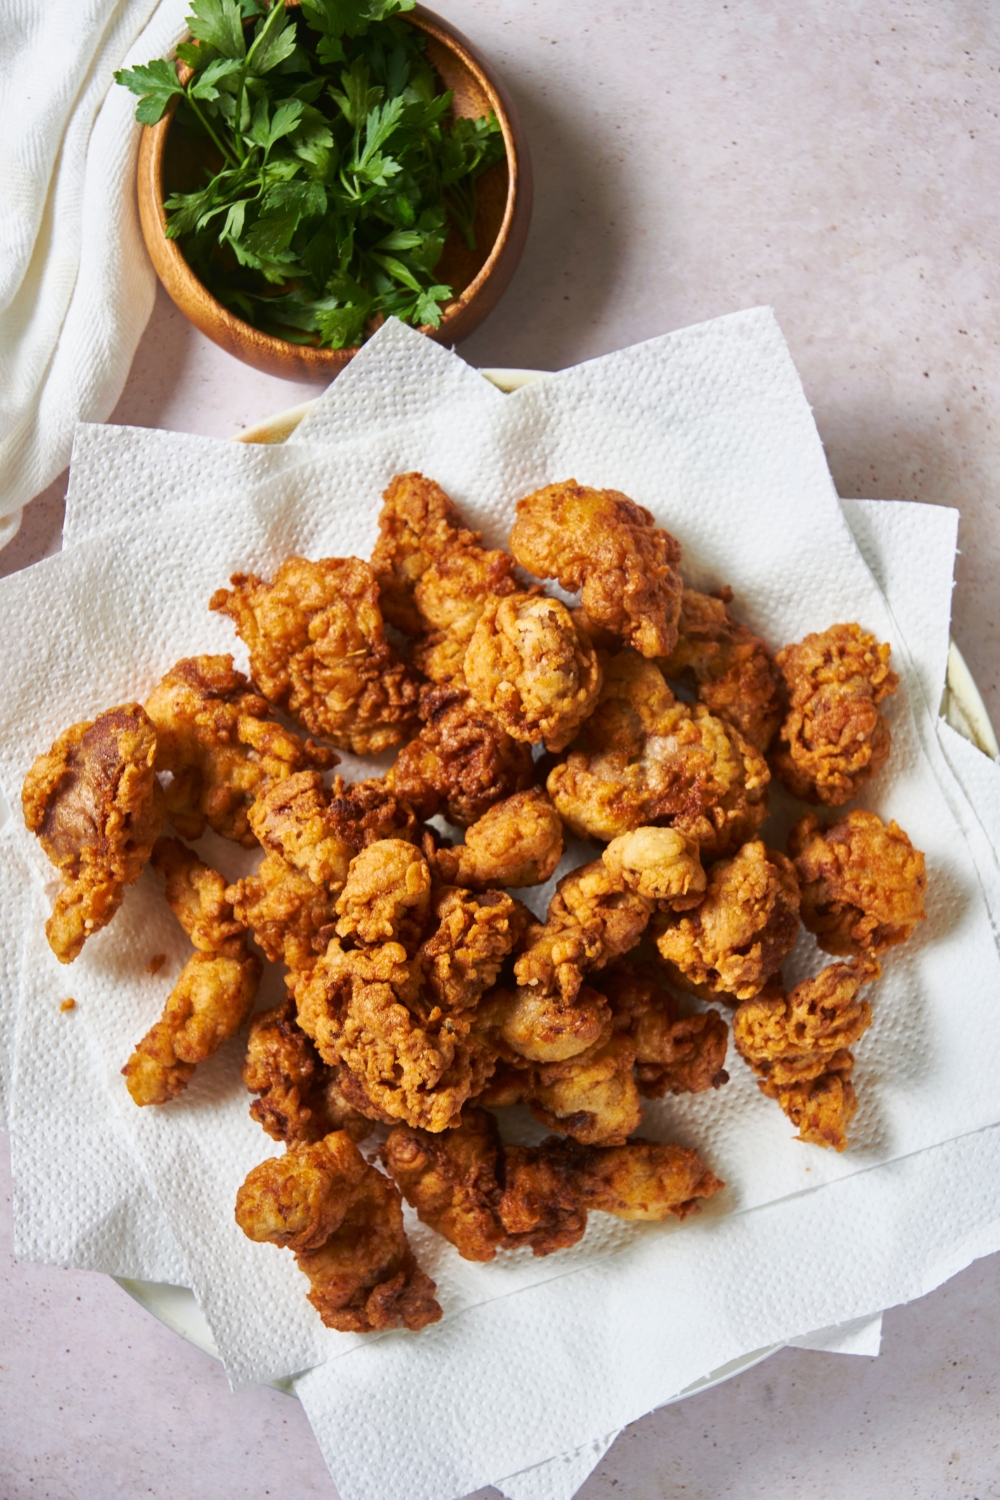 A plate lined with paper towels and filled with fried chicken pieces. Next to the plate is a bowl of fresh herbs.